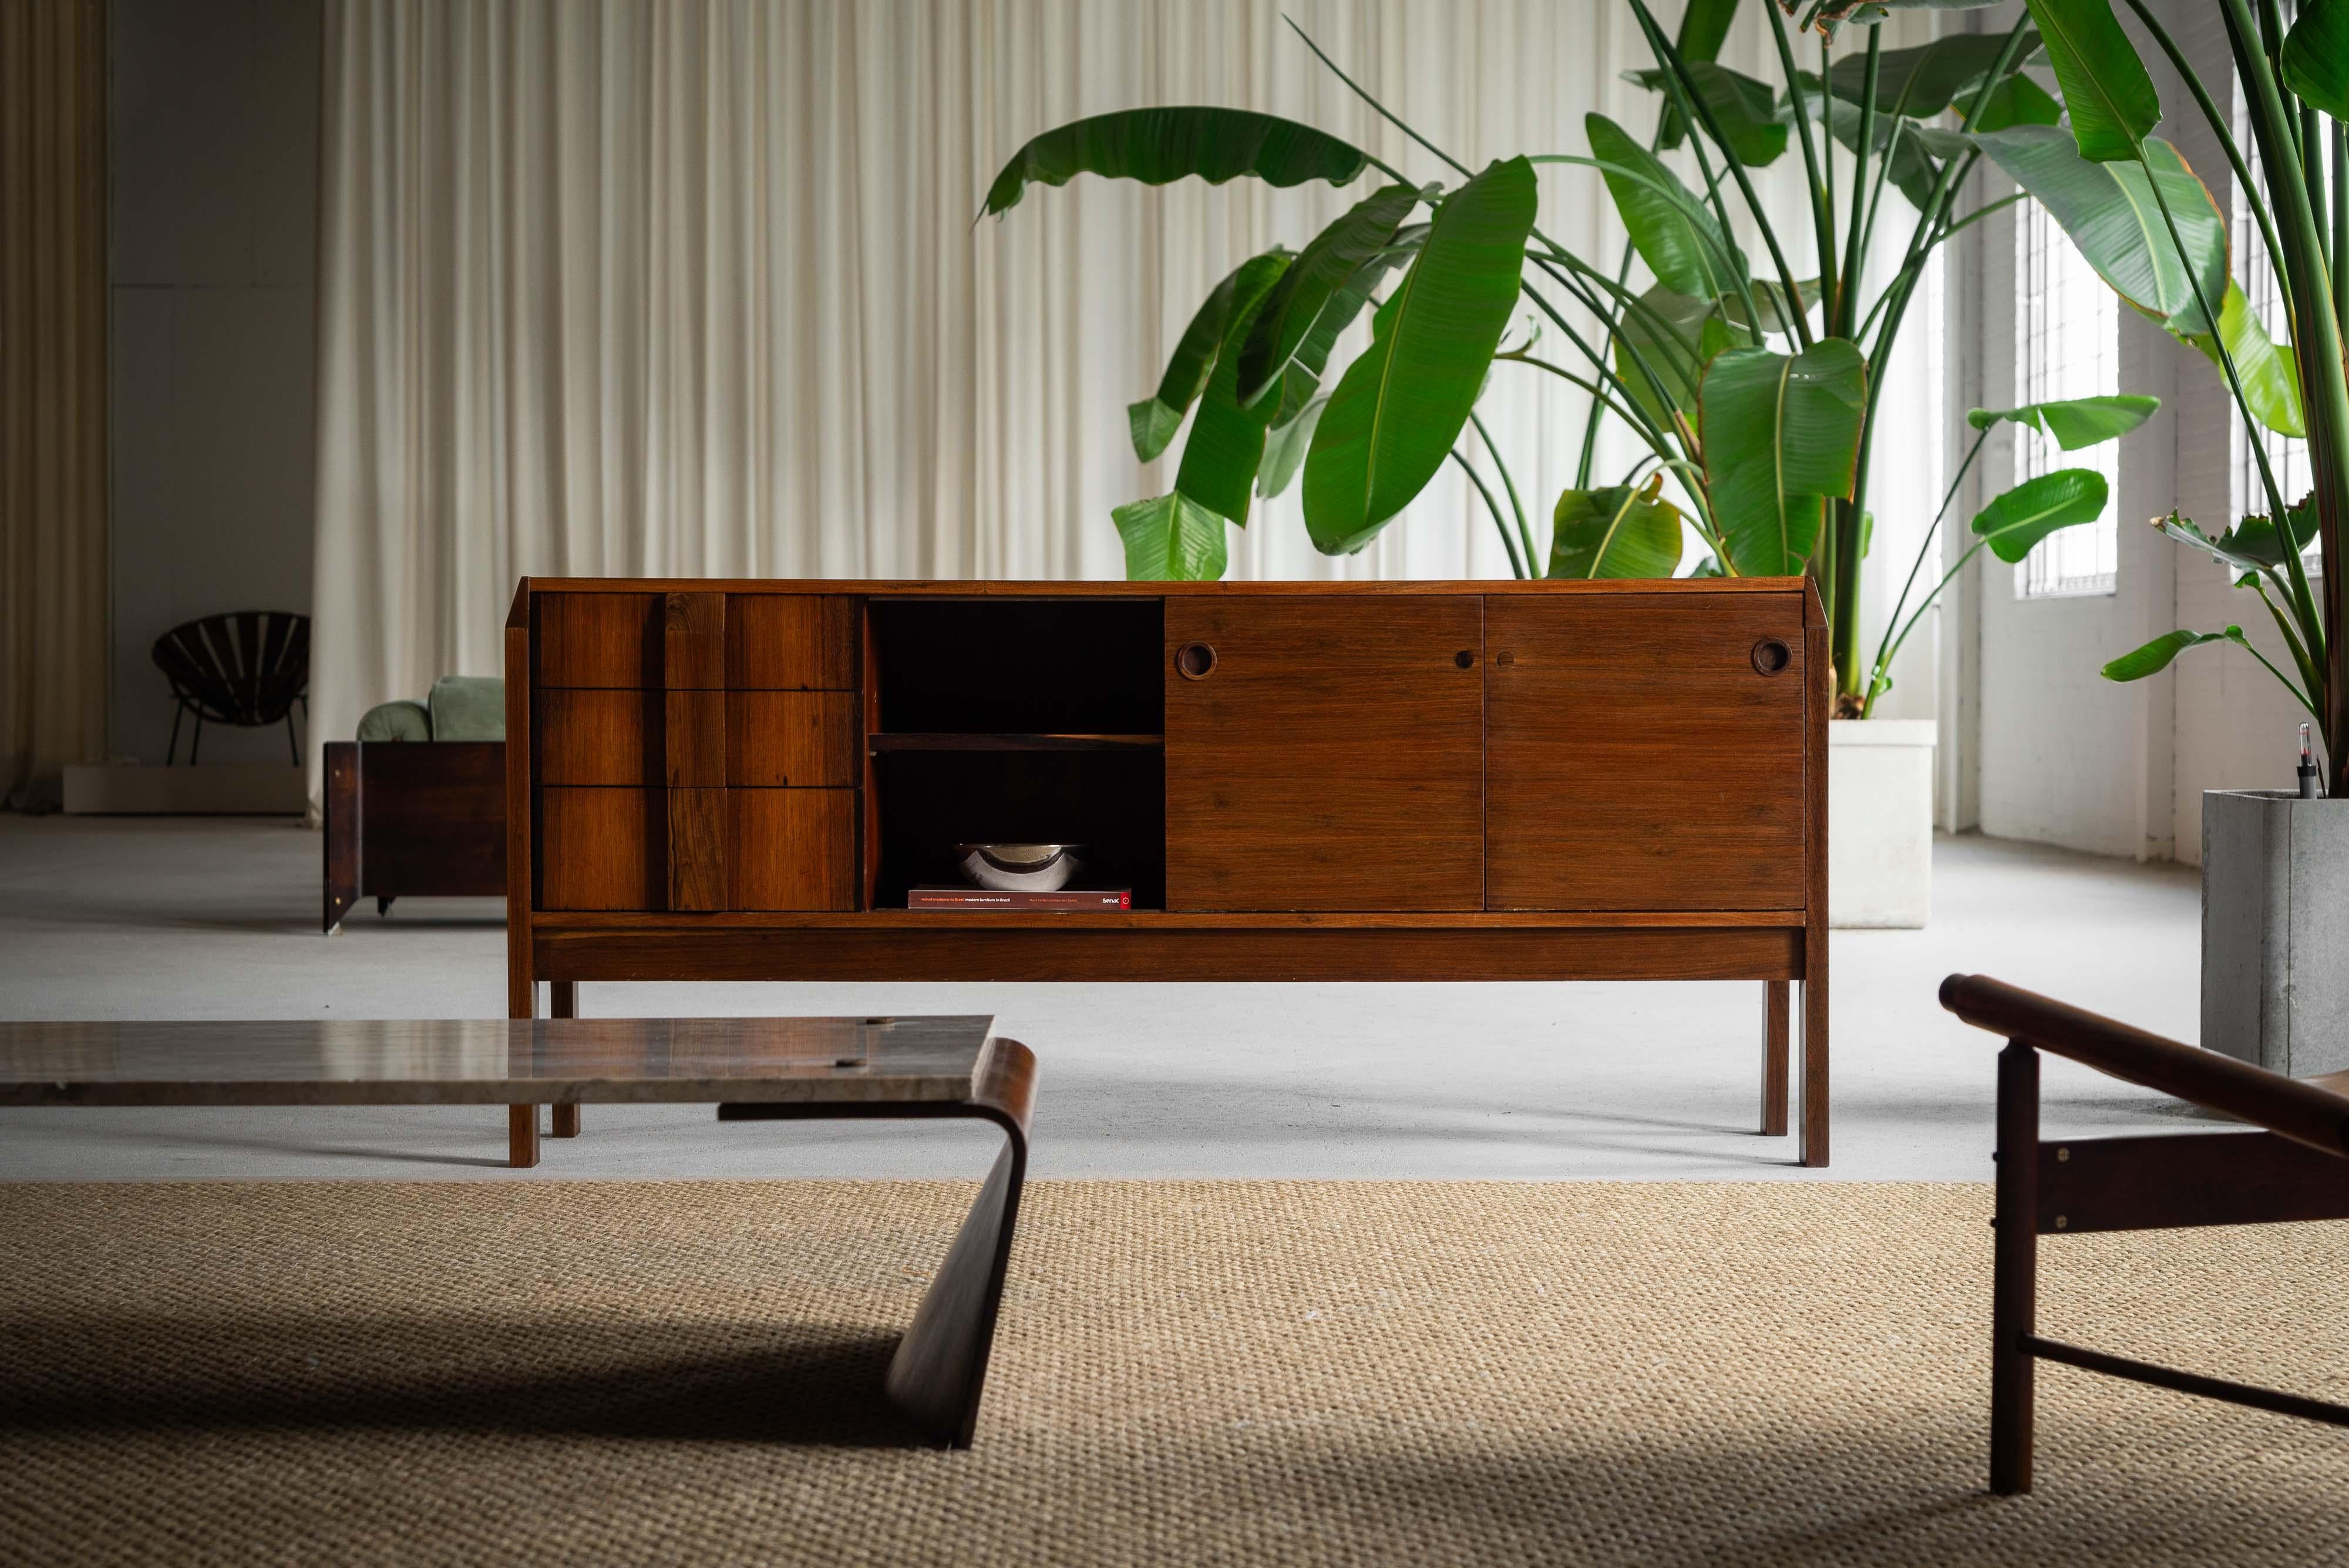 Very nice and rare sideboard designed by Jean Gillon and manufactured by Italma, Brazil 1960. Made from patchwork rosewood veneer, which draws inspiration from designs by Jorge Zalszupin for l'Atelier. The thoughtful design features slightly angled